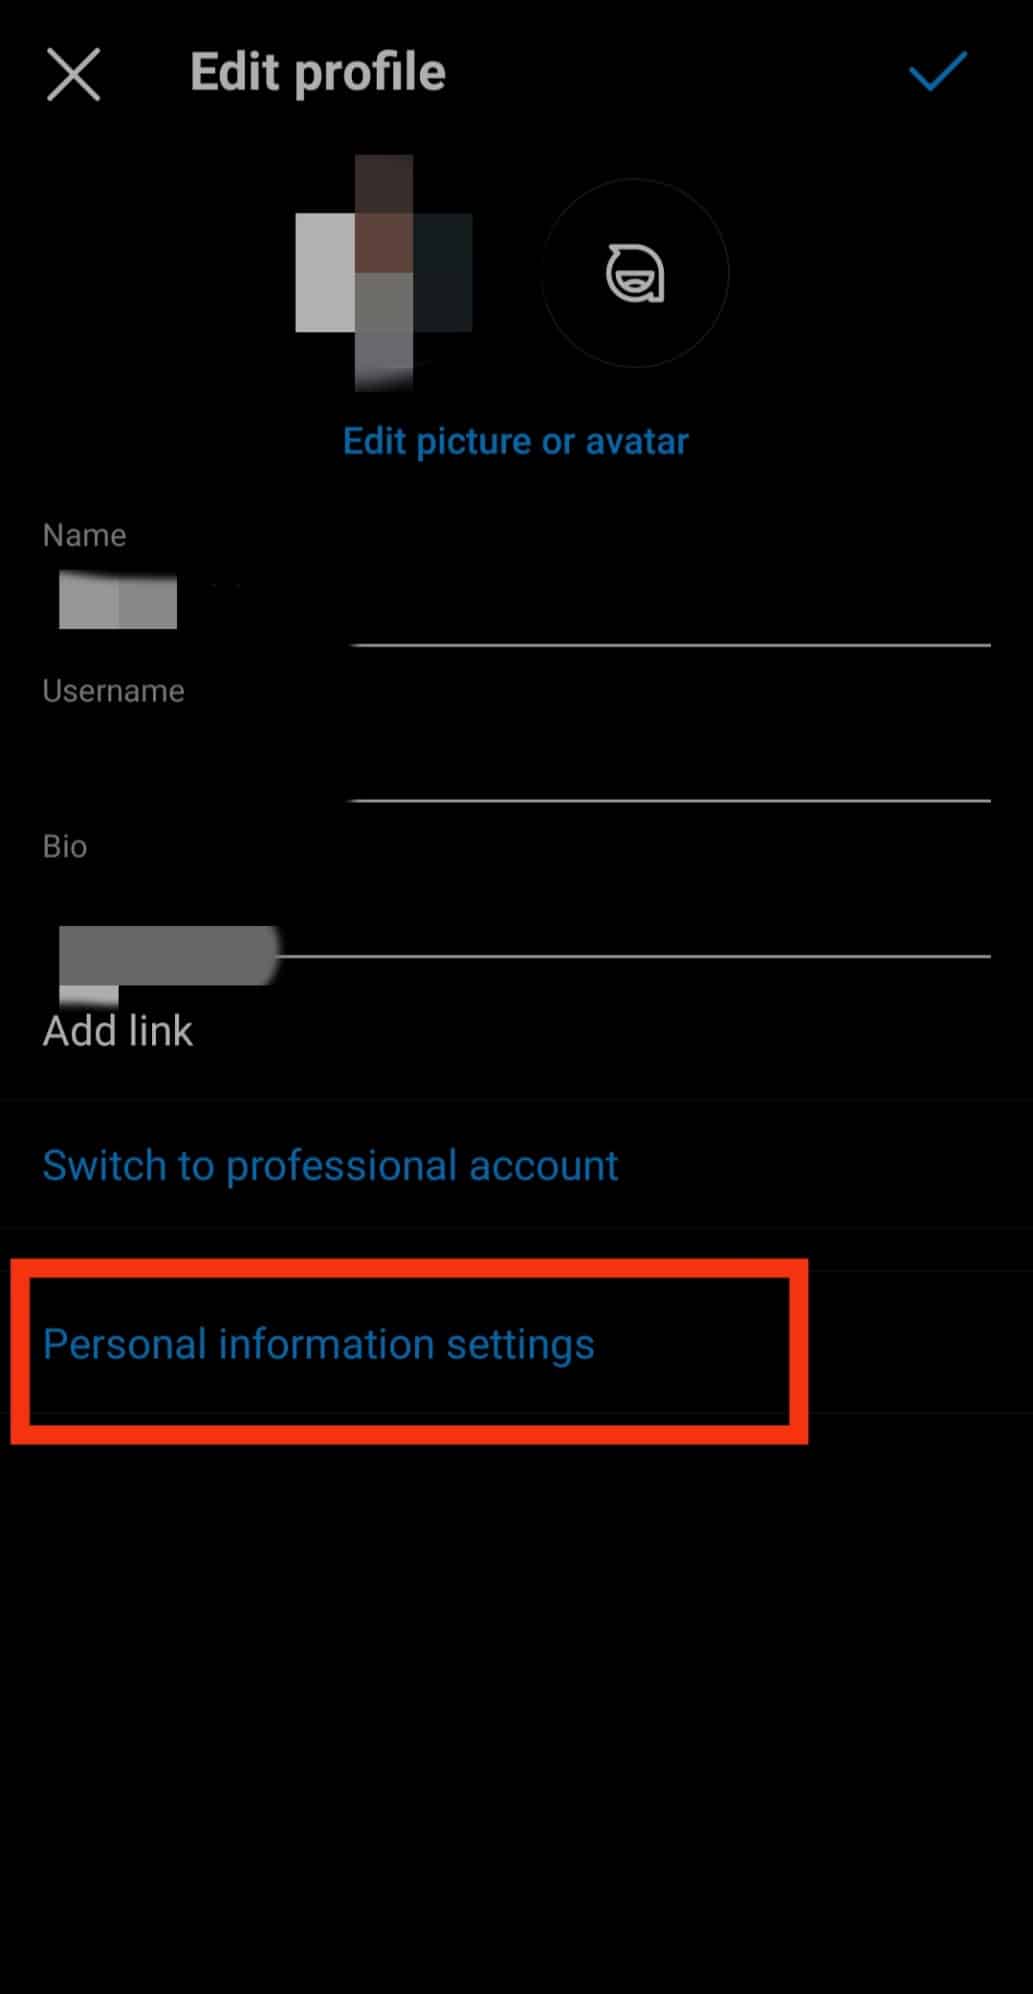 Your phone number is included under the title Personal information settings | see private account photos on Instagram